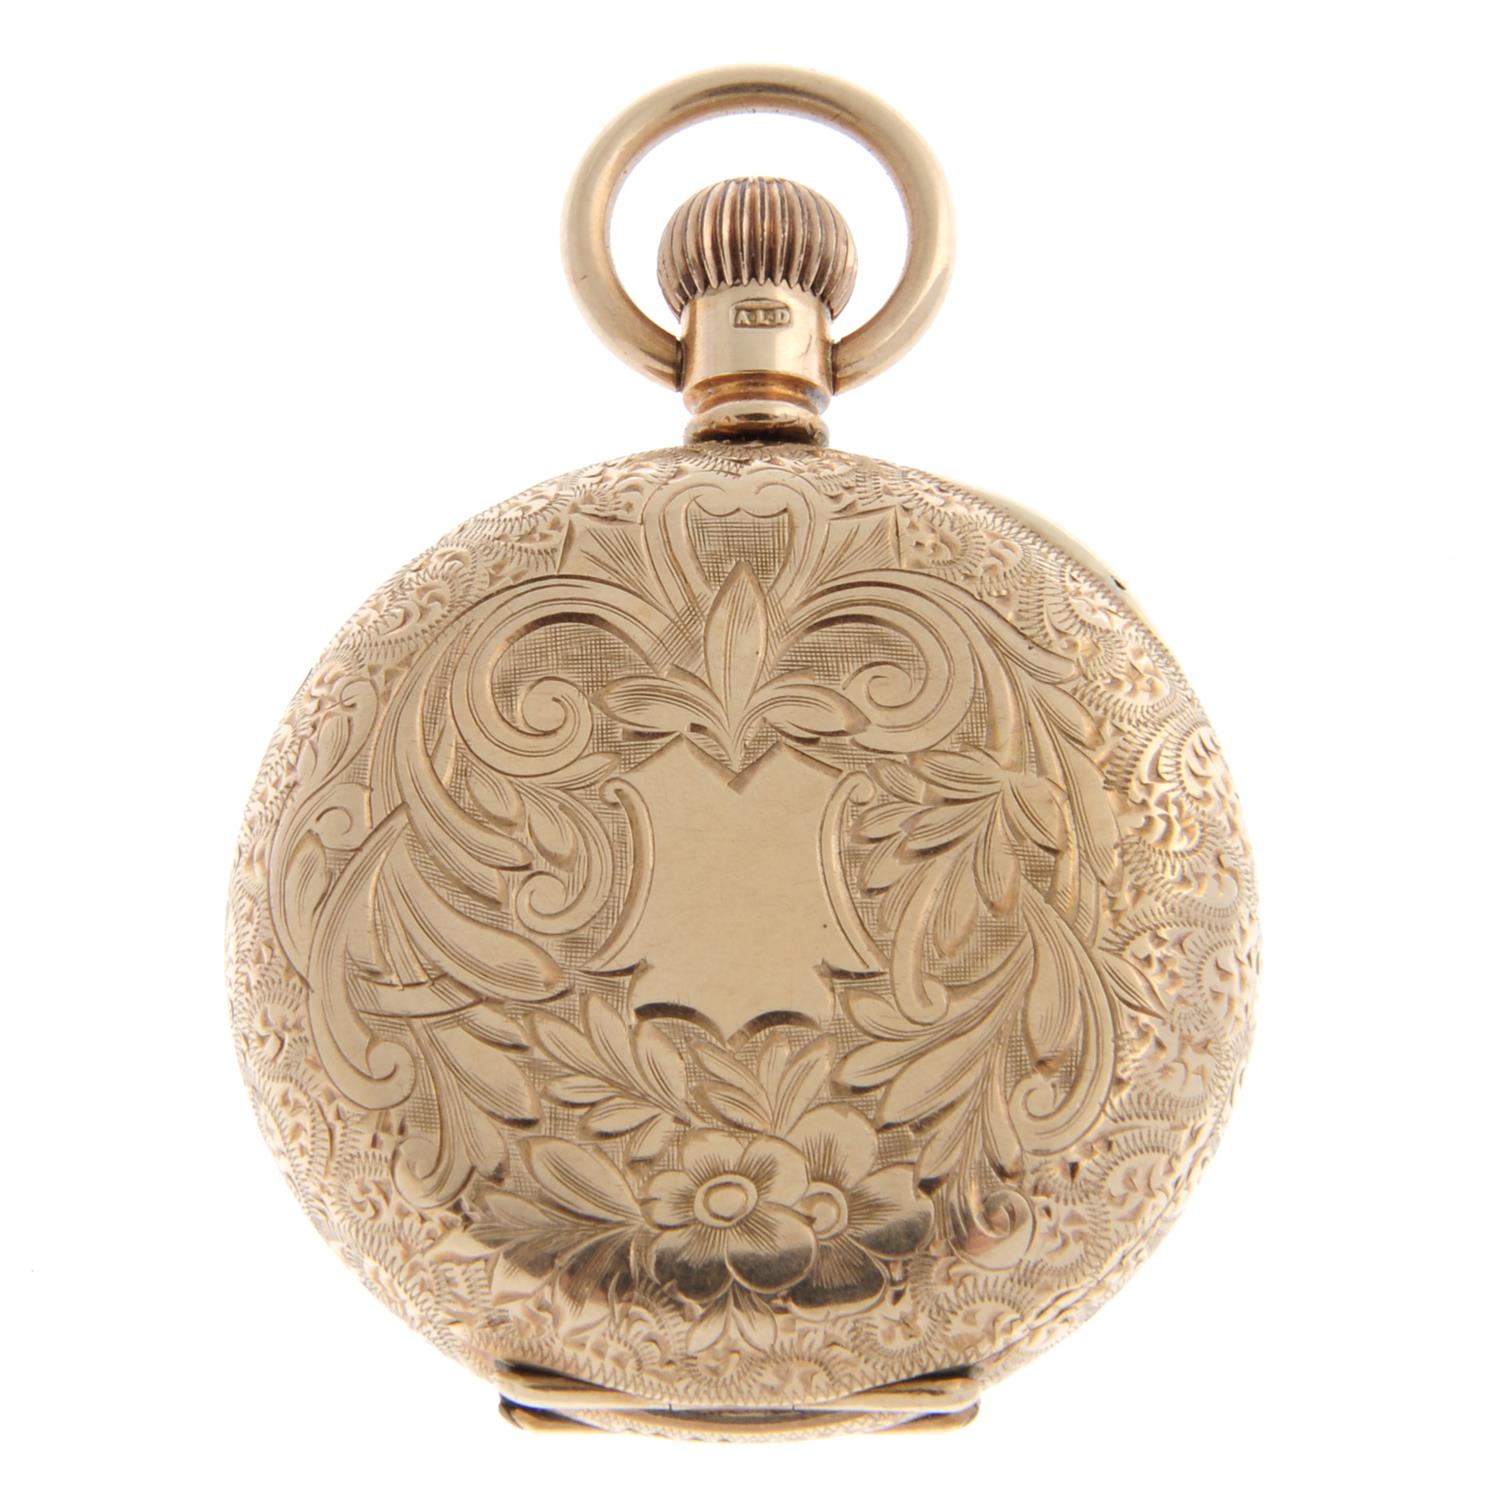 An open face pocket watch by Waltham, 33mm. - Image 2 of 3